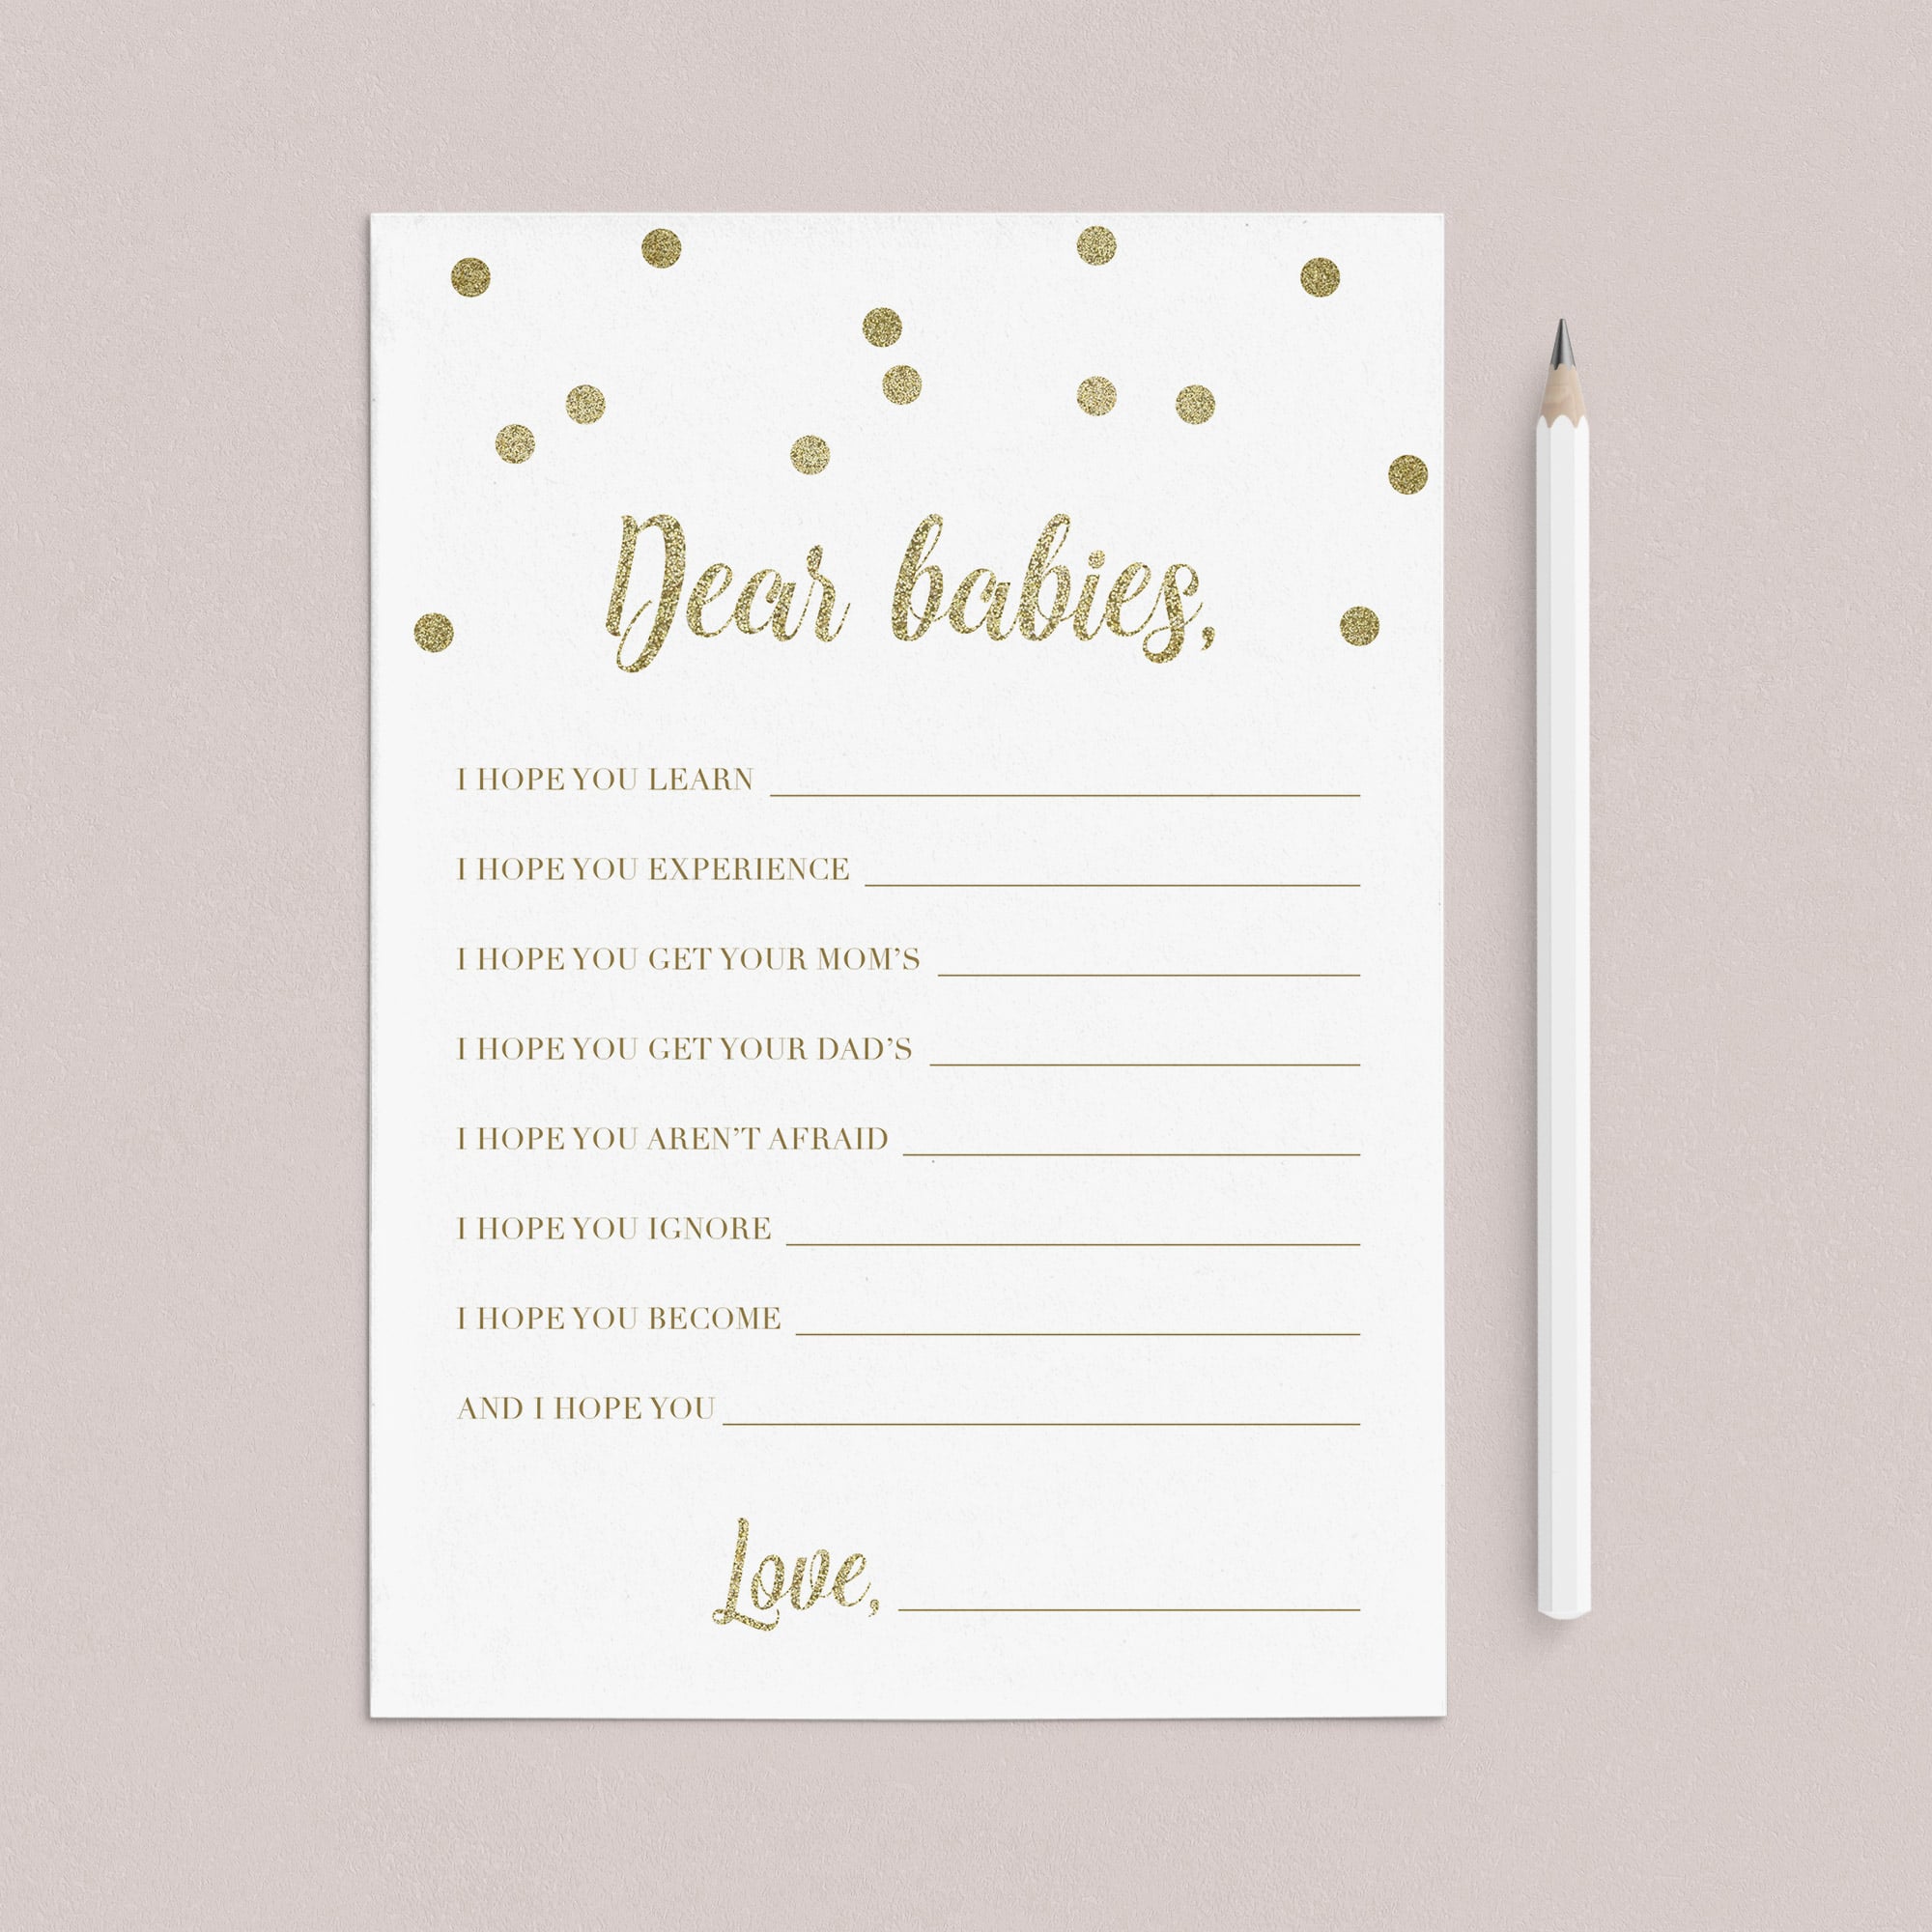 Dear babies cards printables for twin baby shower party by LittleSizzle